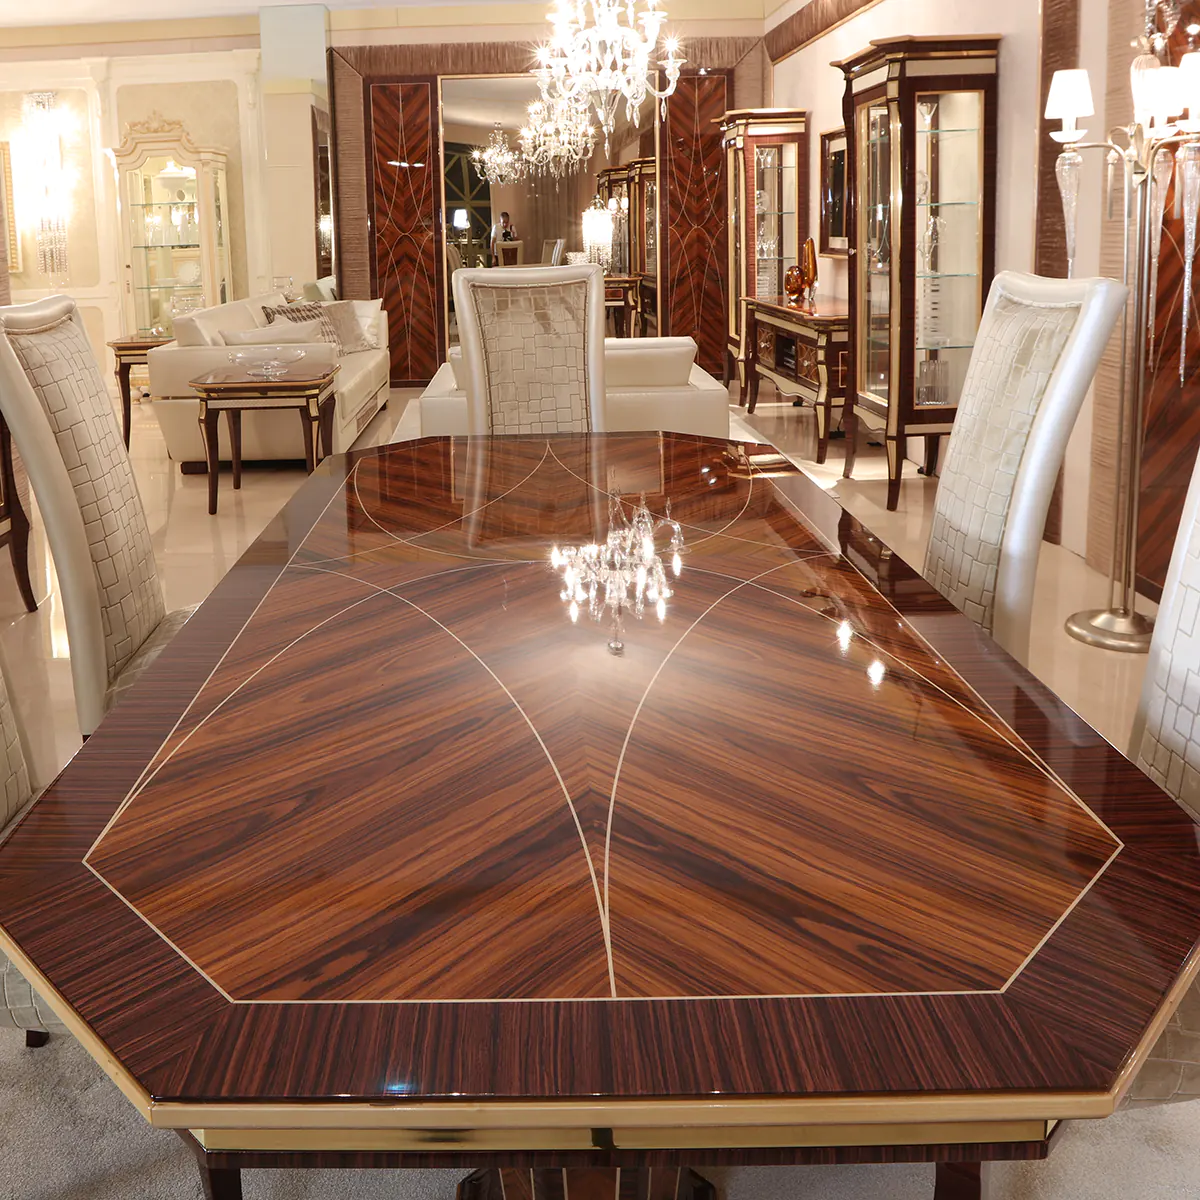 Monte Carlo LUX table with 2 pedestals